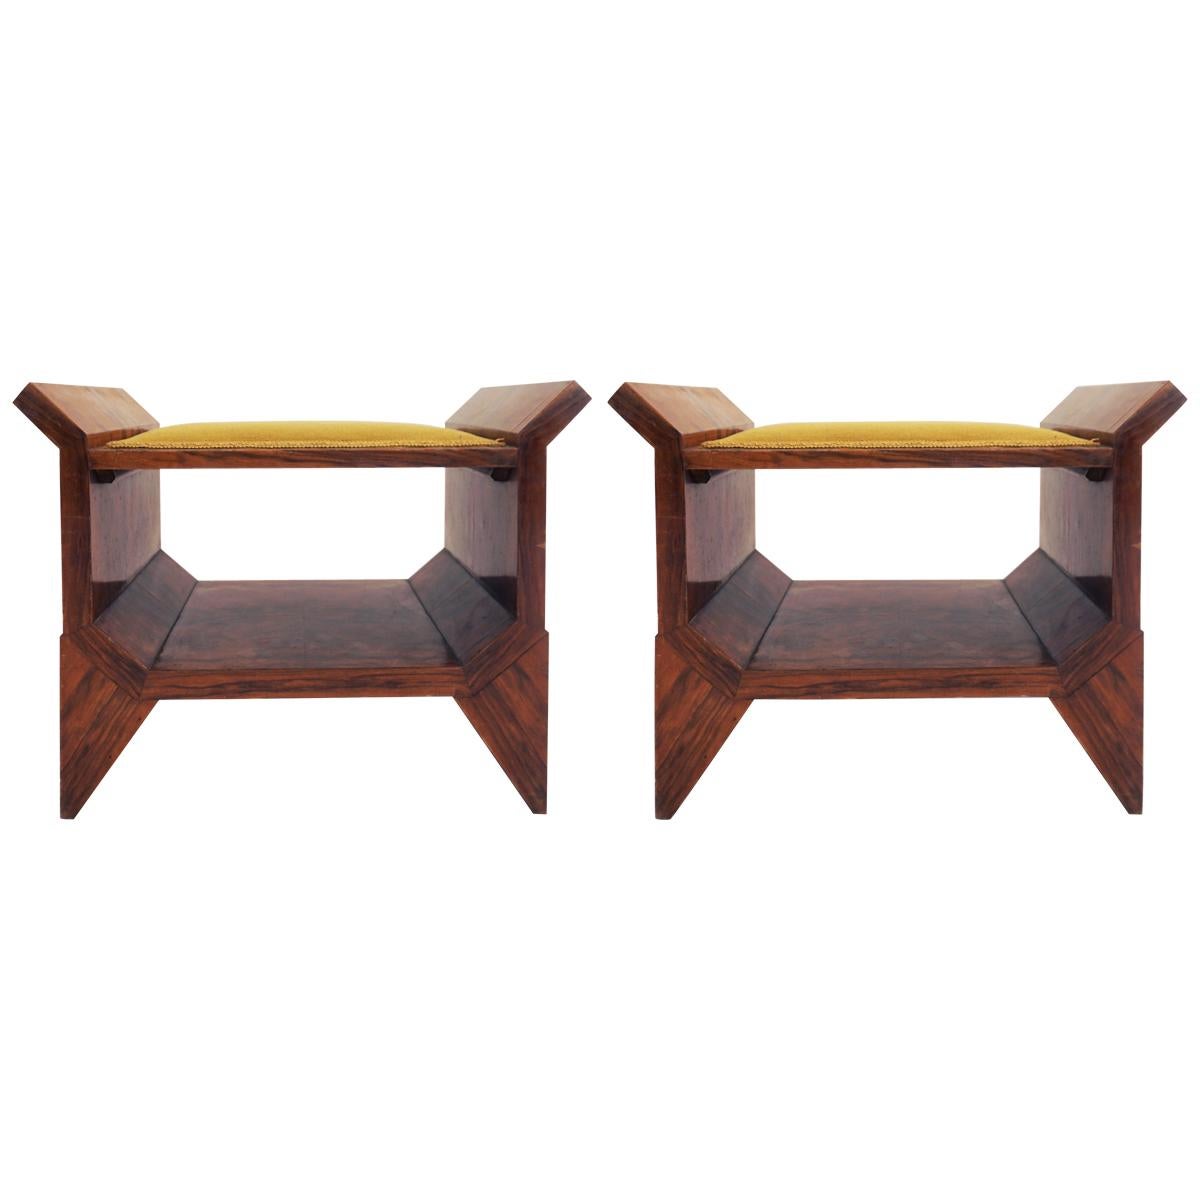 Italian Architectural Art Deco Entrance Stools in Walnut Root